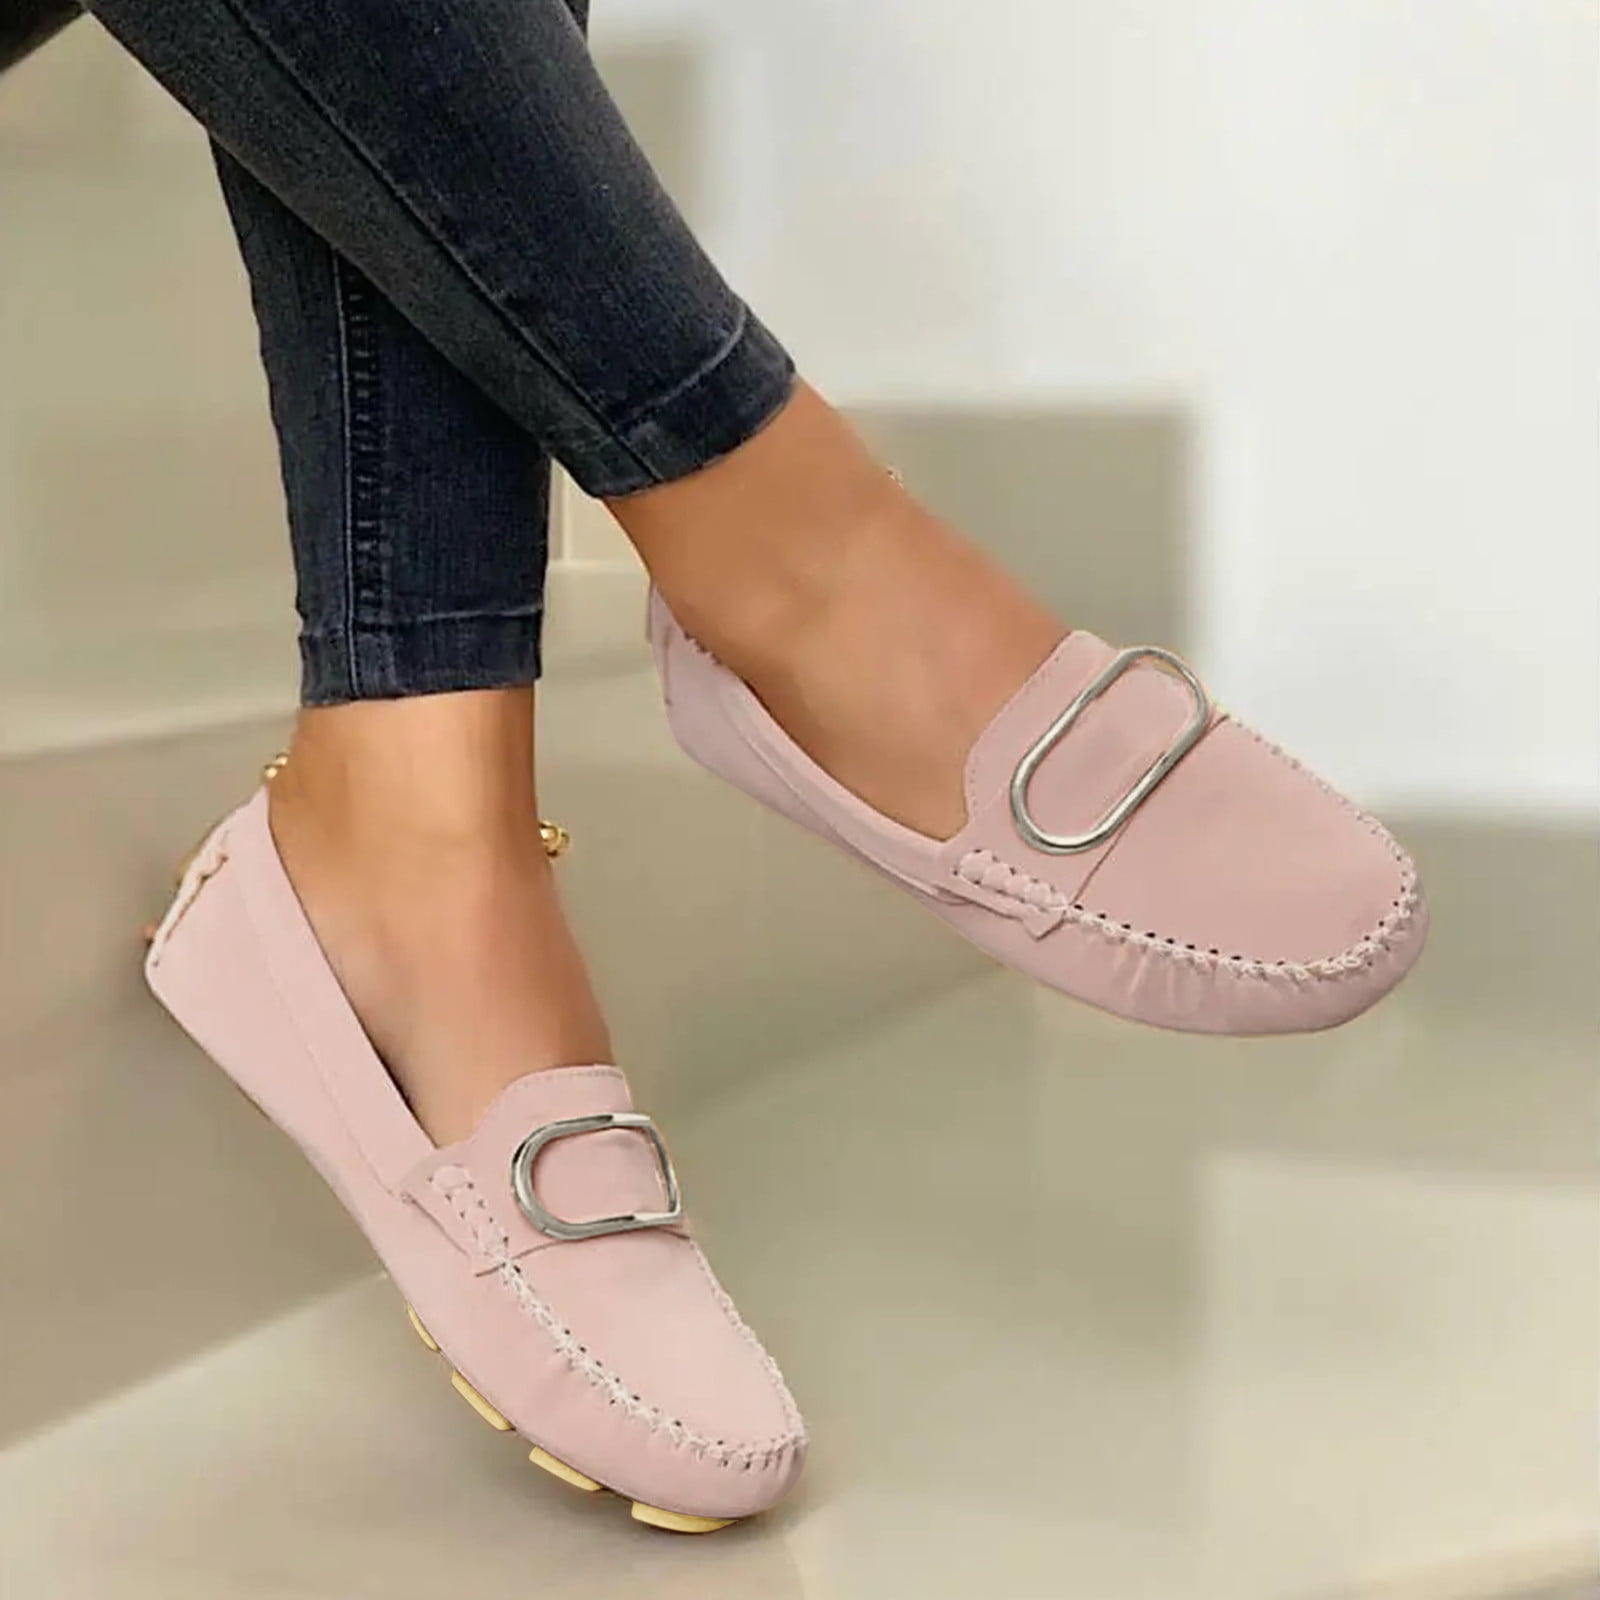 Women Loafers Flat Shoes Casual Round Toe Board Soft Running Gym Slip-on Sneakers Leather 2018 